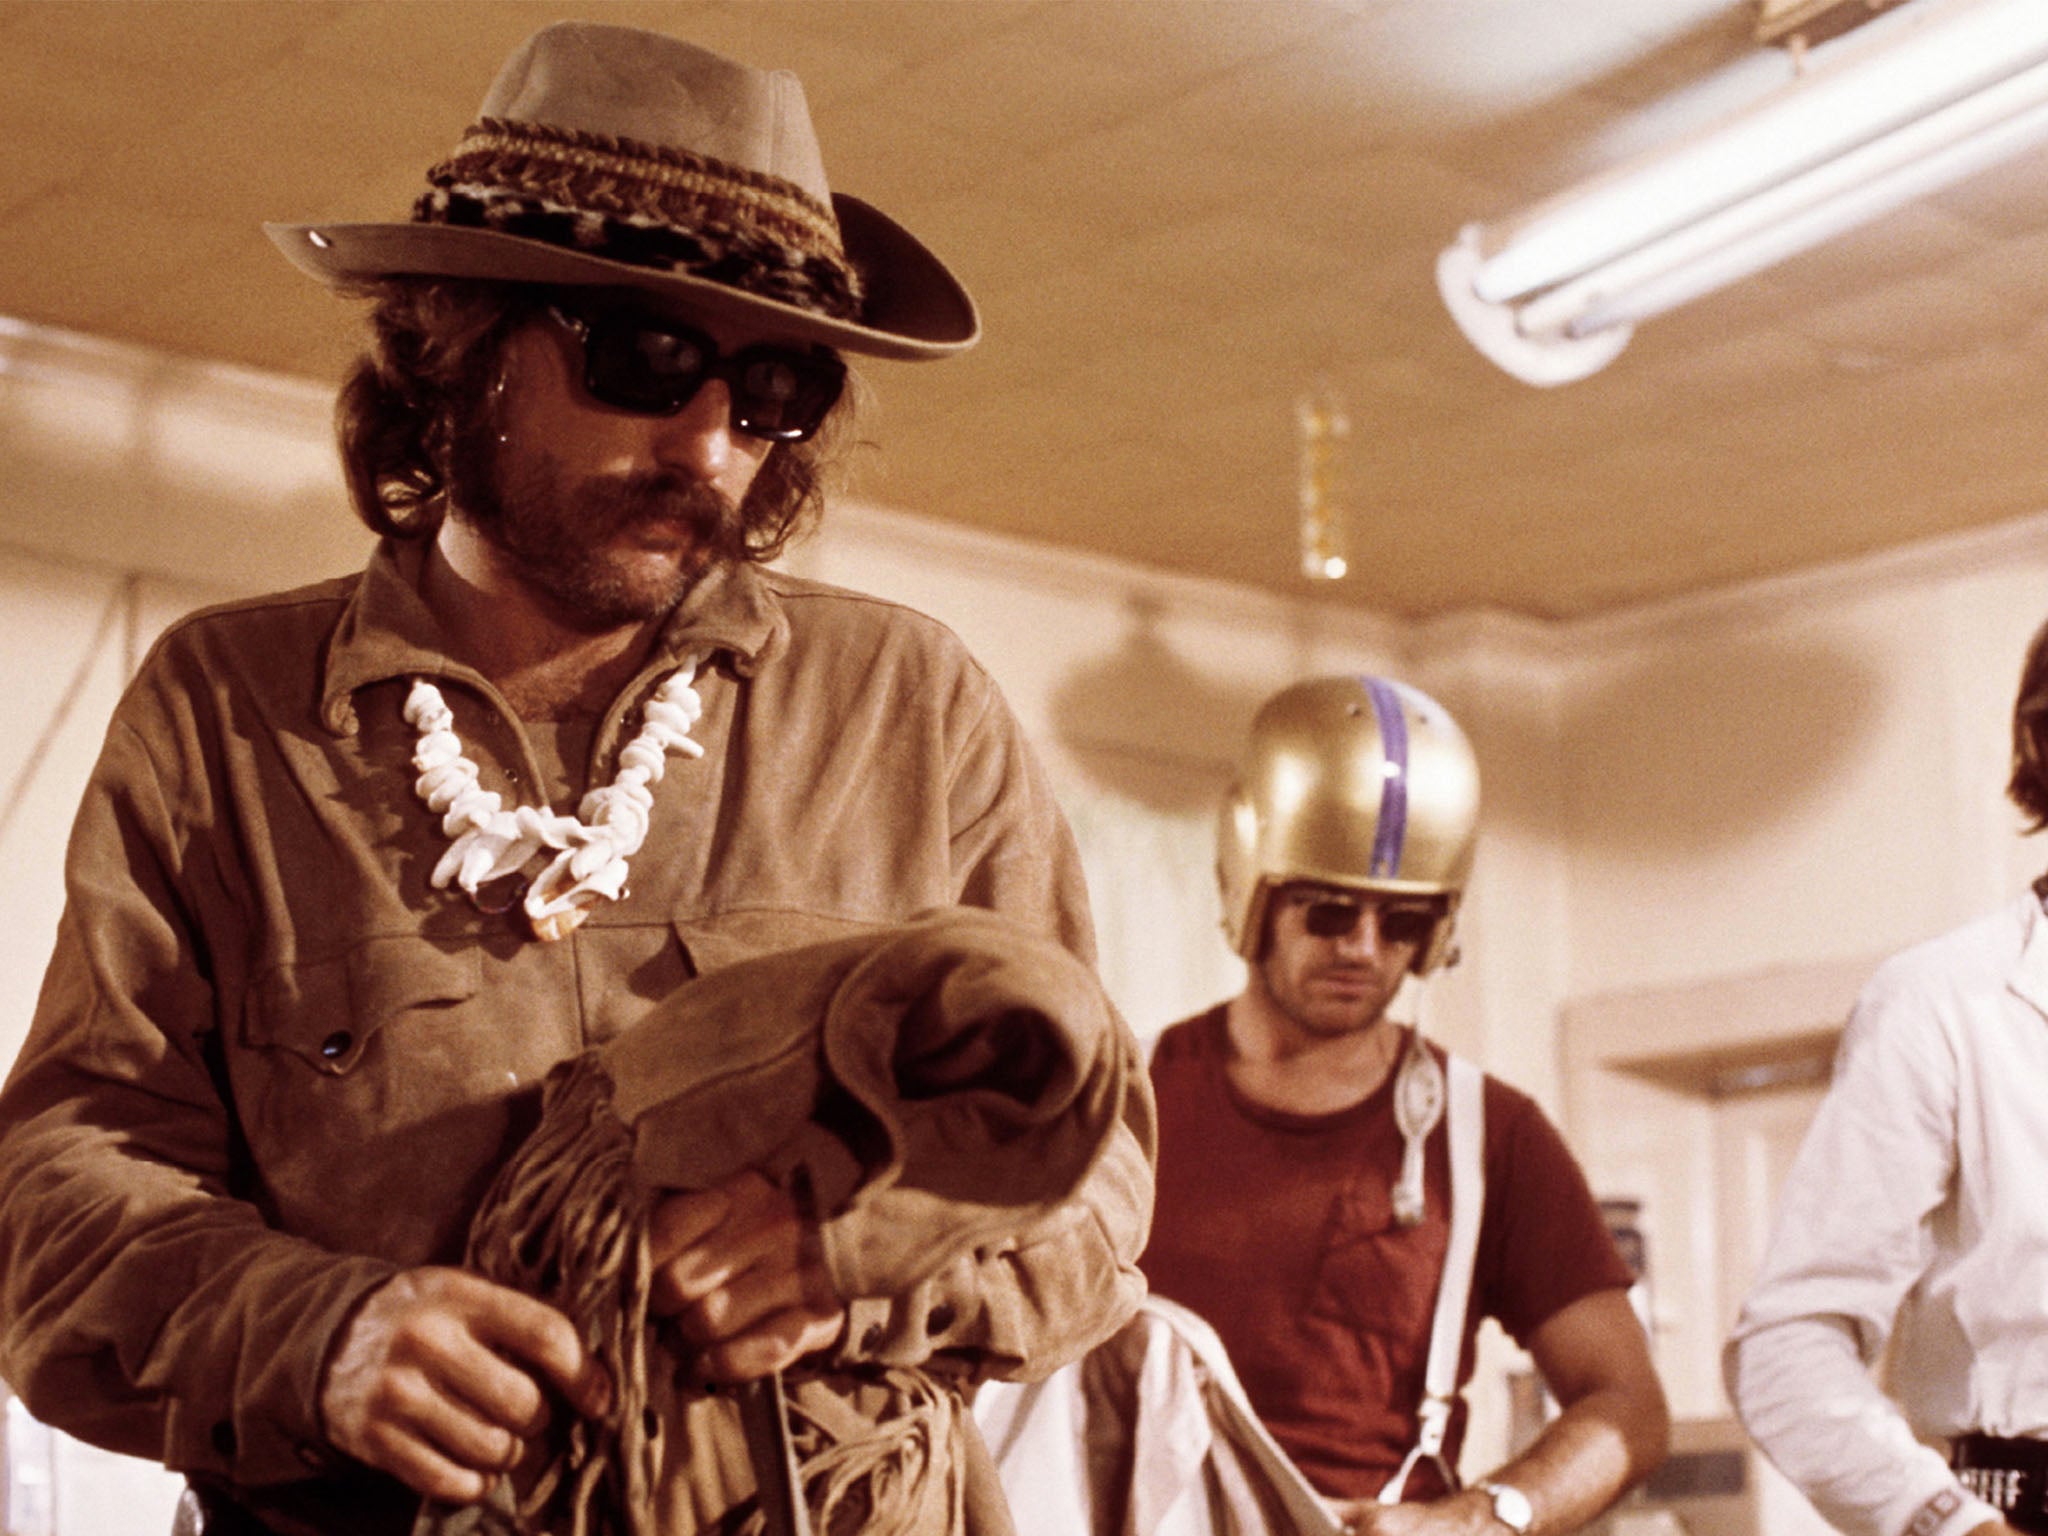 The Road to Taos: Freedom, Sunglasses, and Dennis Hopper